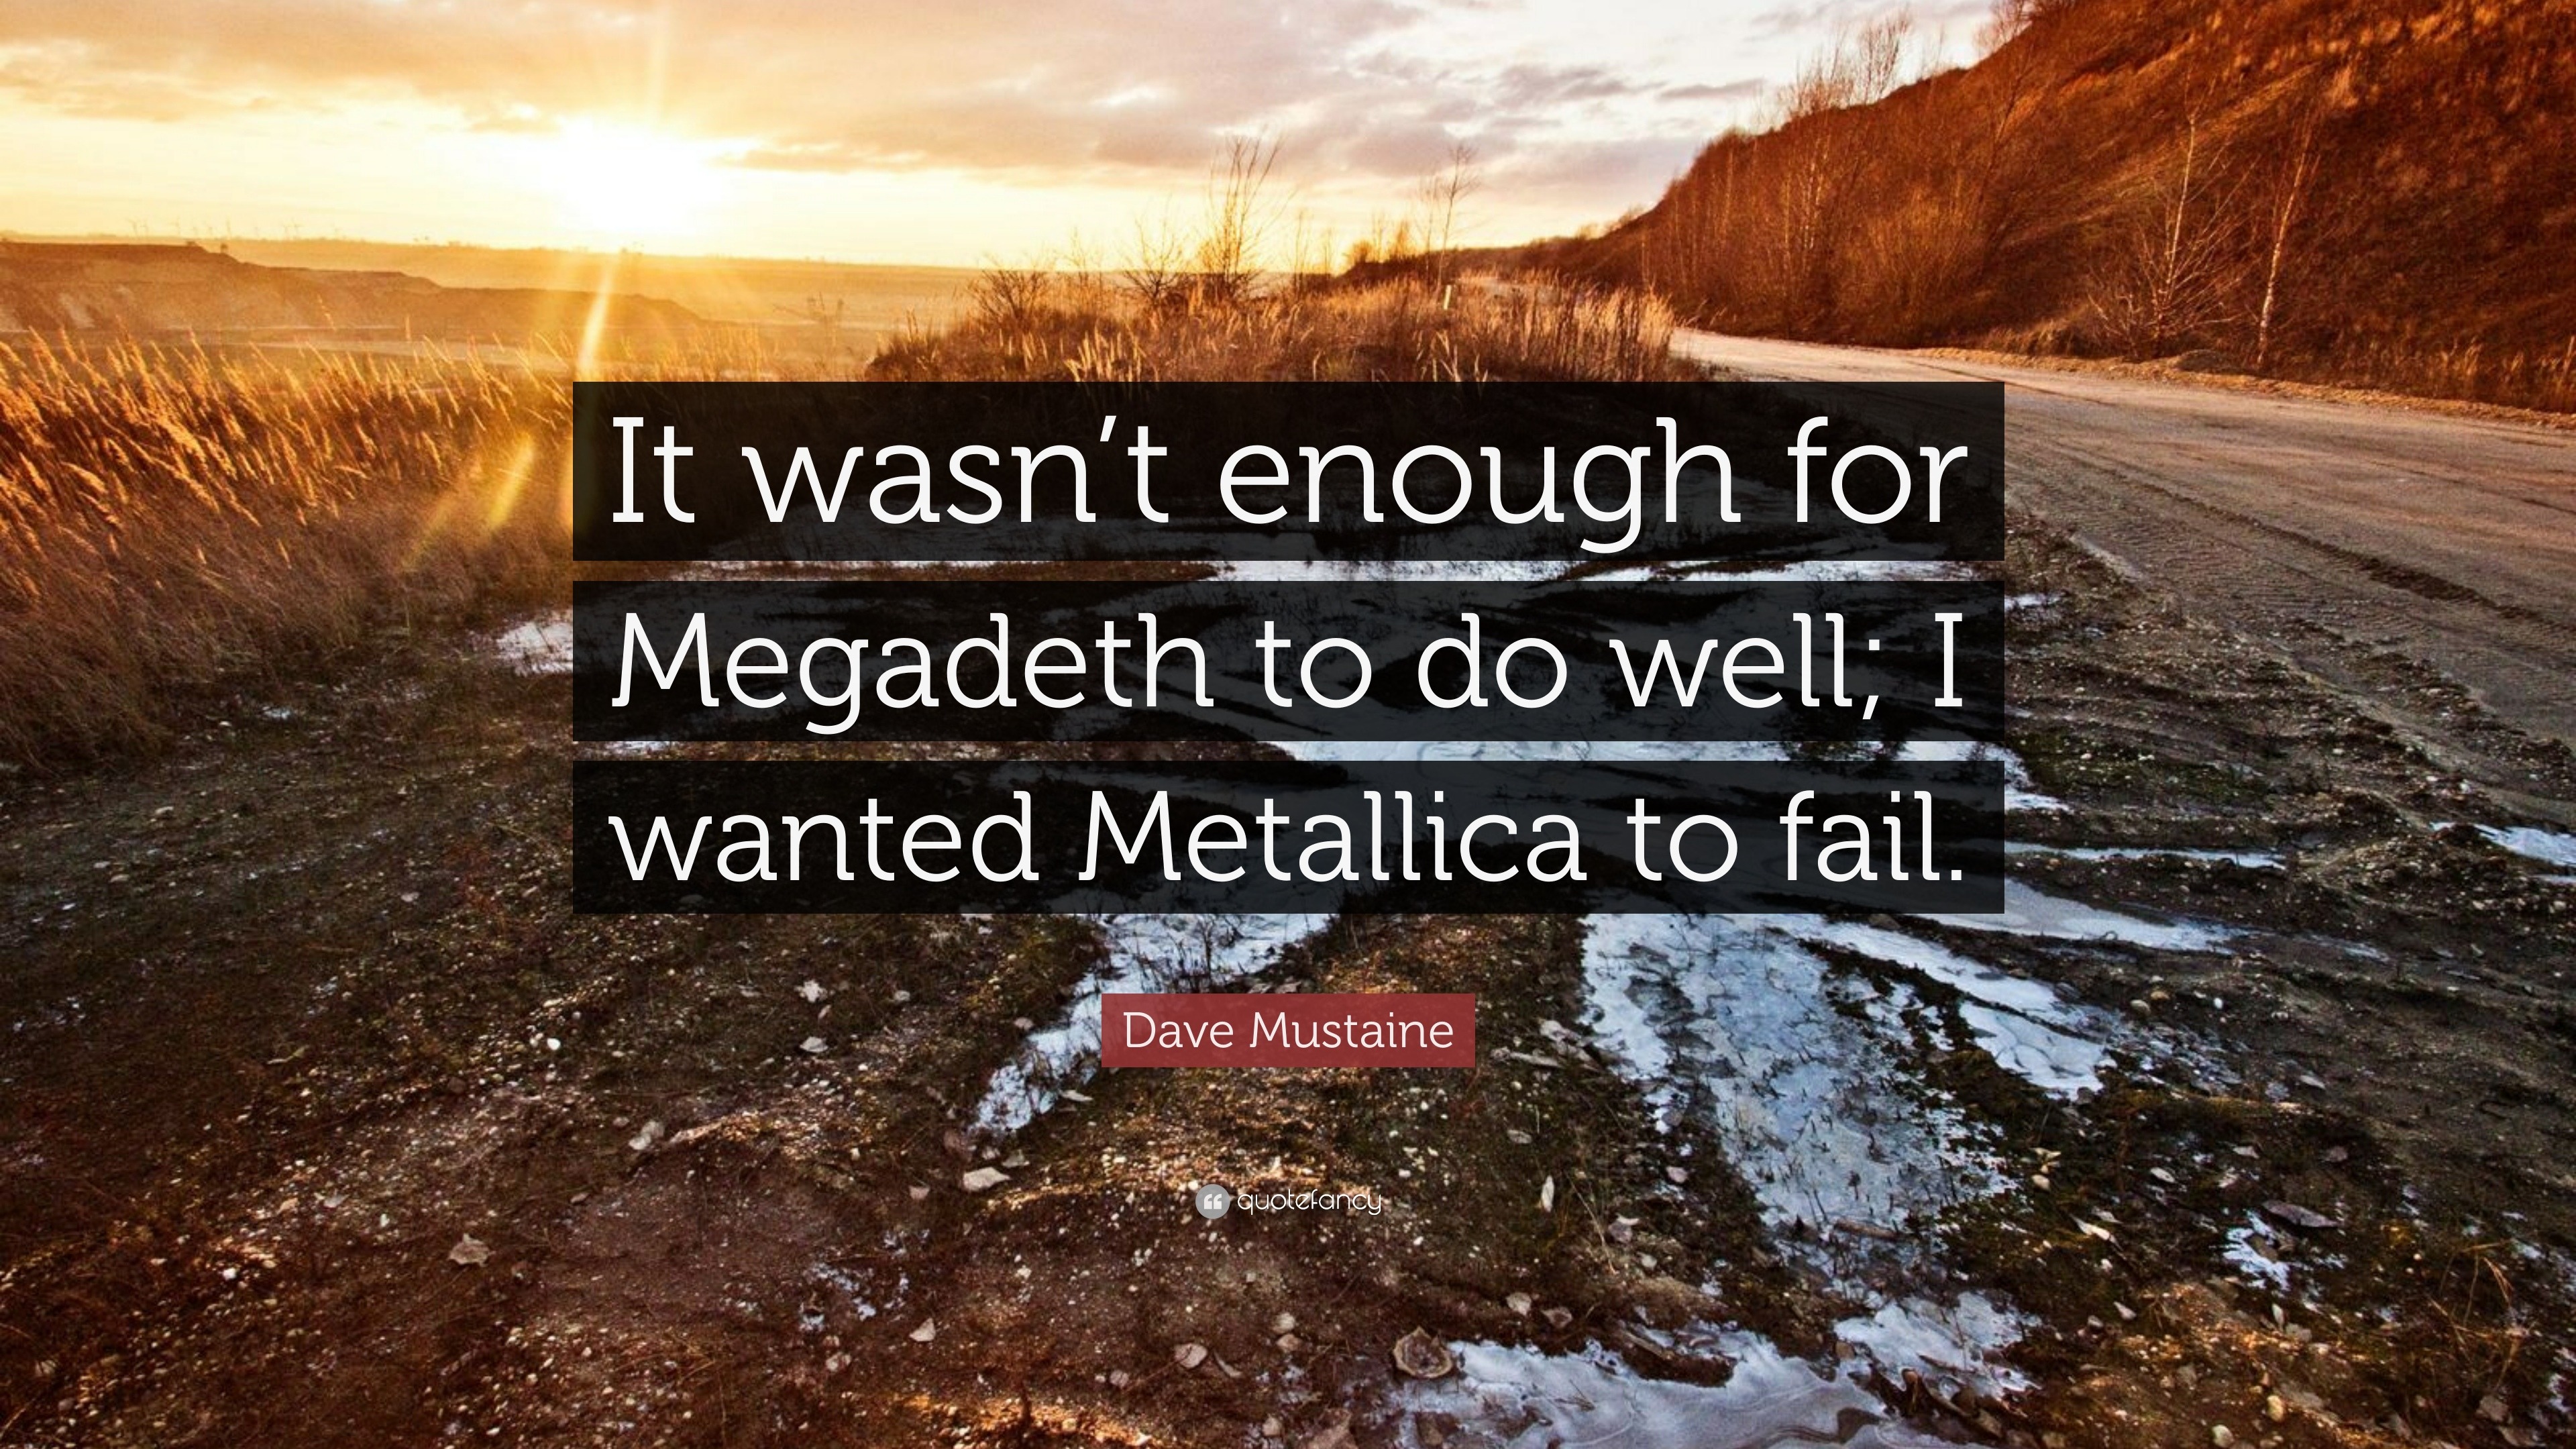 Top 50 Dave Mustaine Quotes (2023 Update) - Quotefancy